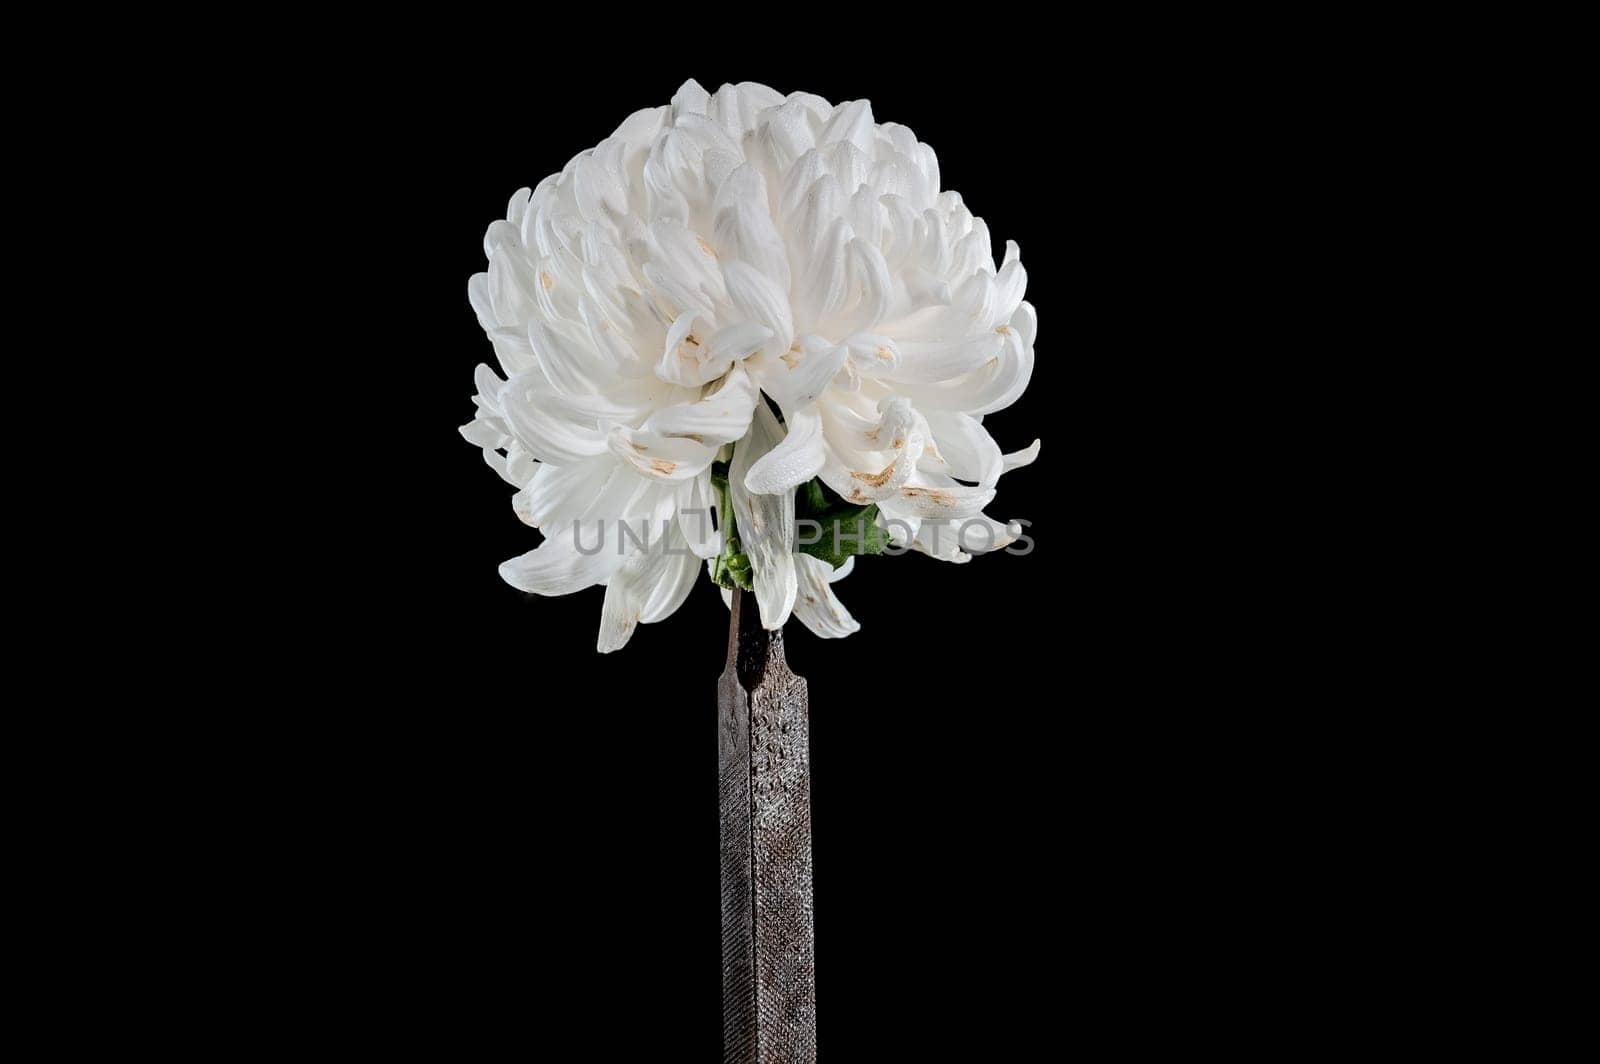 Old rusty rasp file and chrysanthemum on a black background. by Multipedia